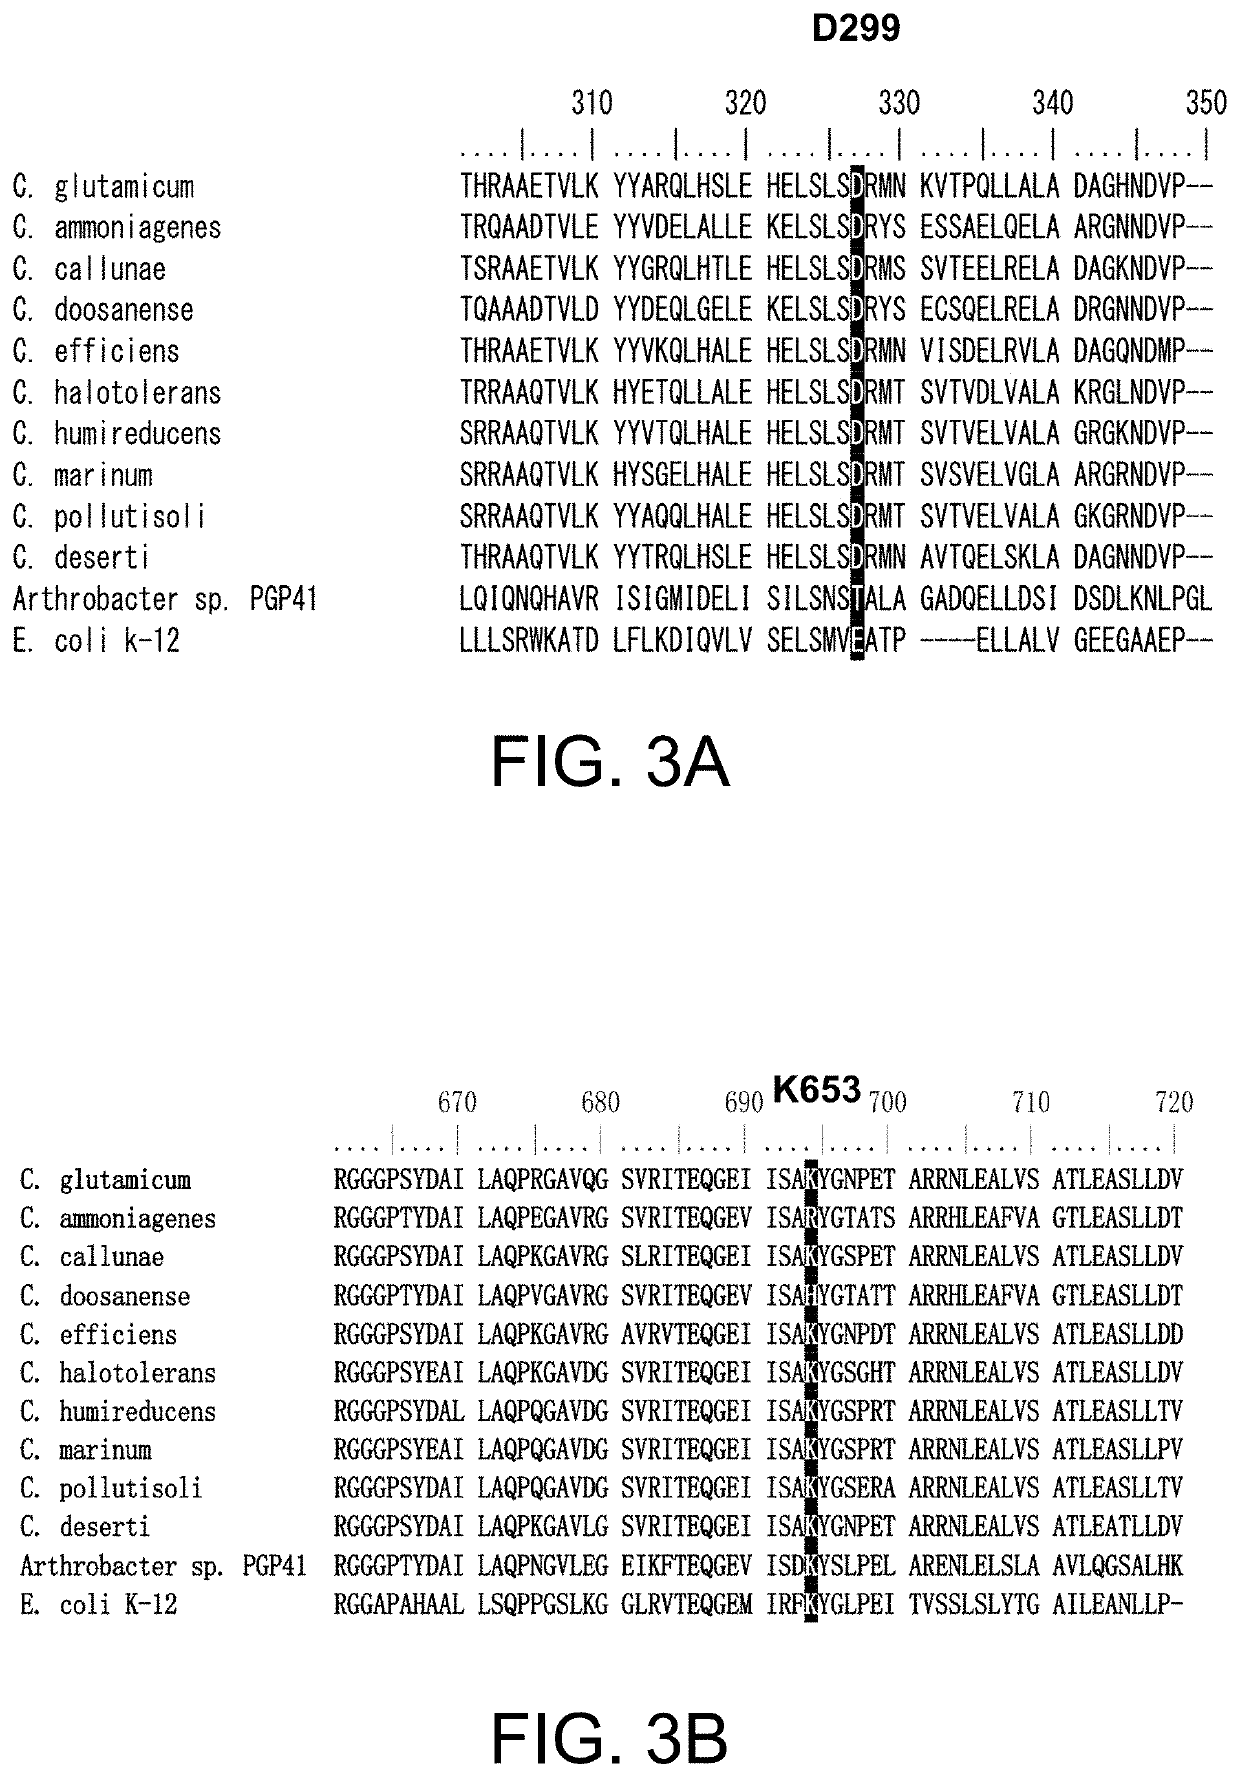 Genetically modified microorganism and method for producing target substance using same